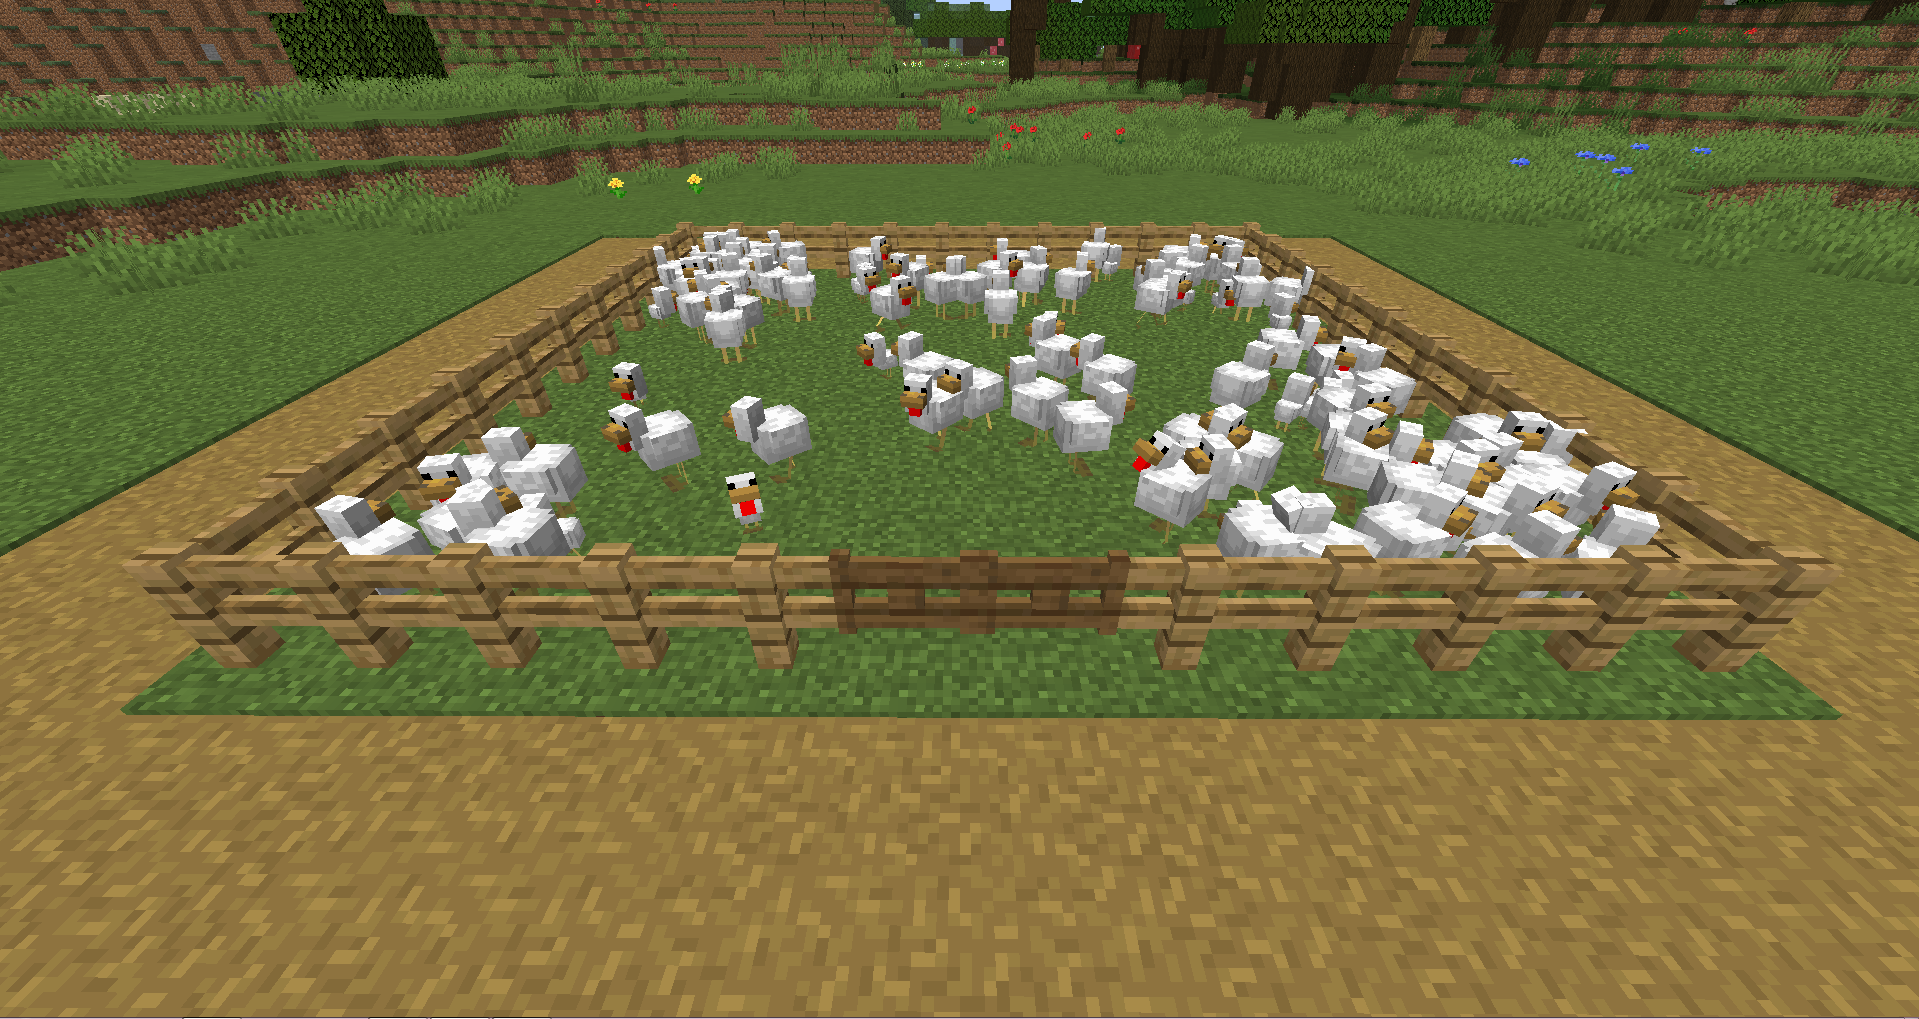 How To Start An Animal Farm in Minecraft